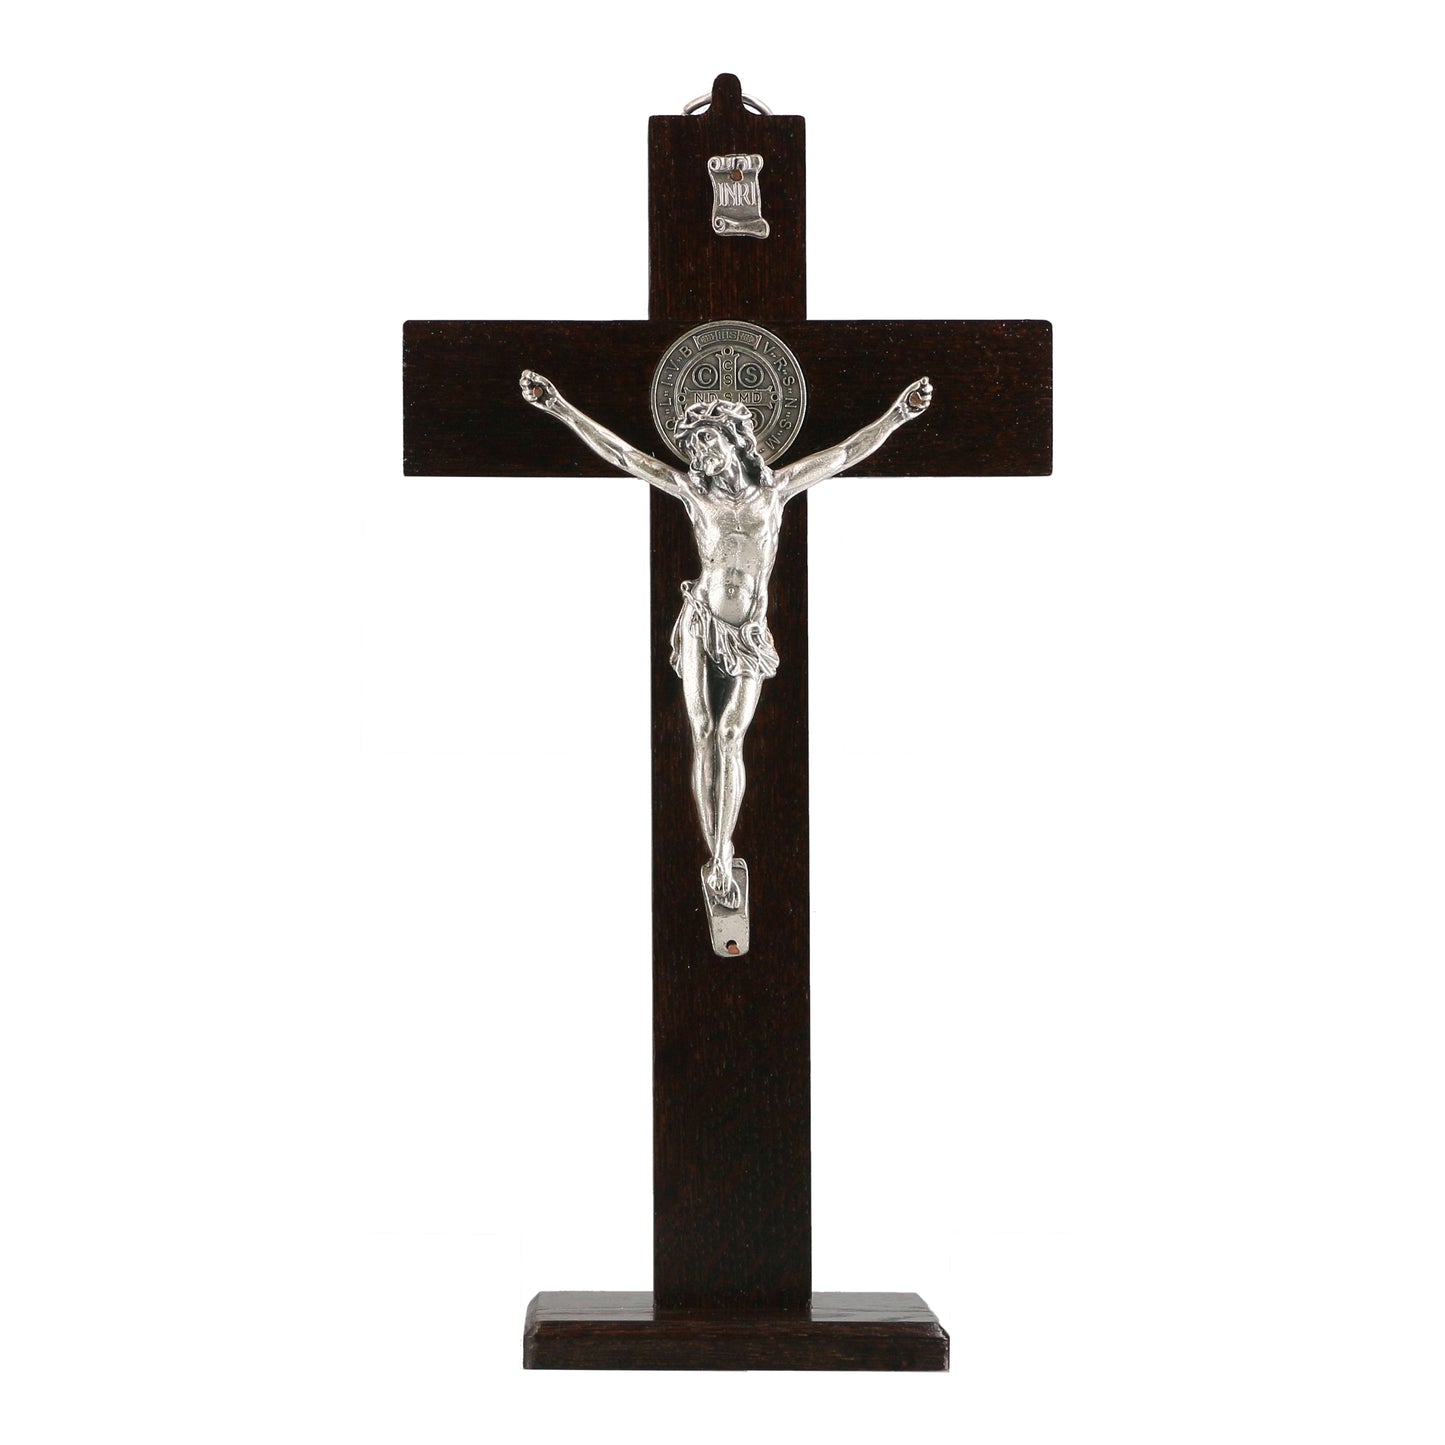 Crucifix – Wall Hanging/Stand Wooden Cross With Saint Benedict Medal (Dark Walnut Wood)